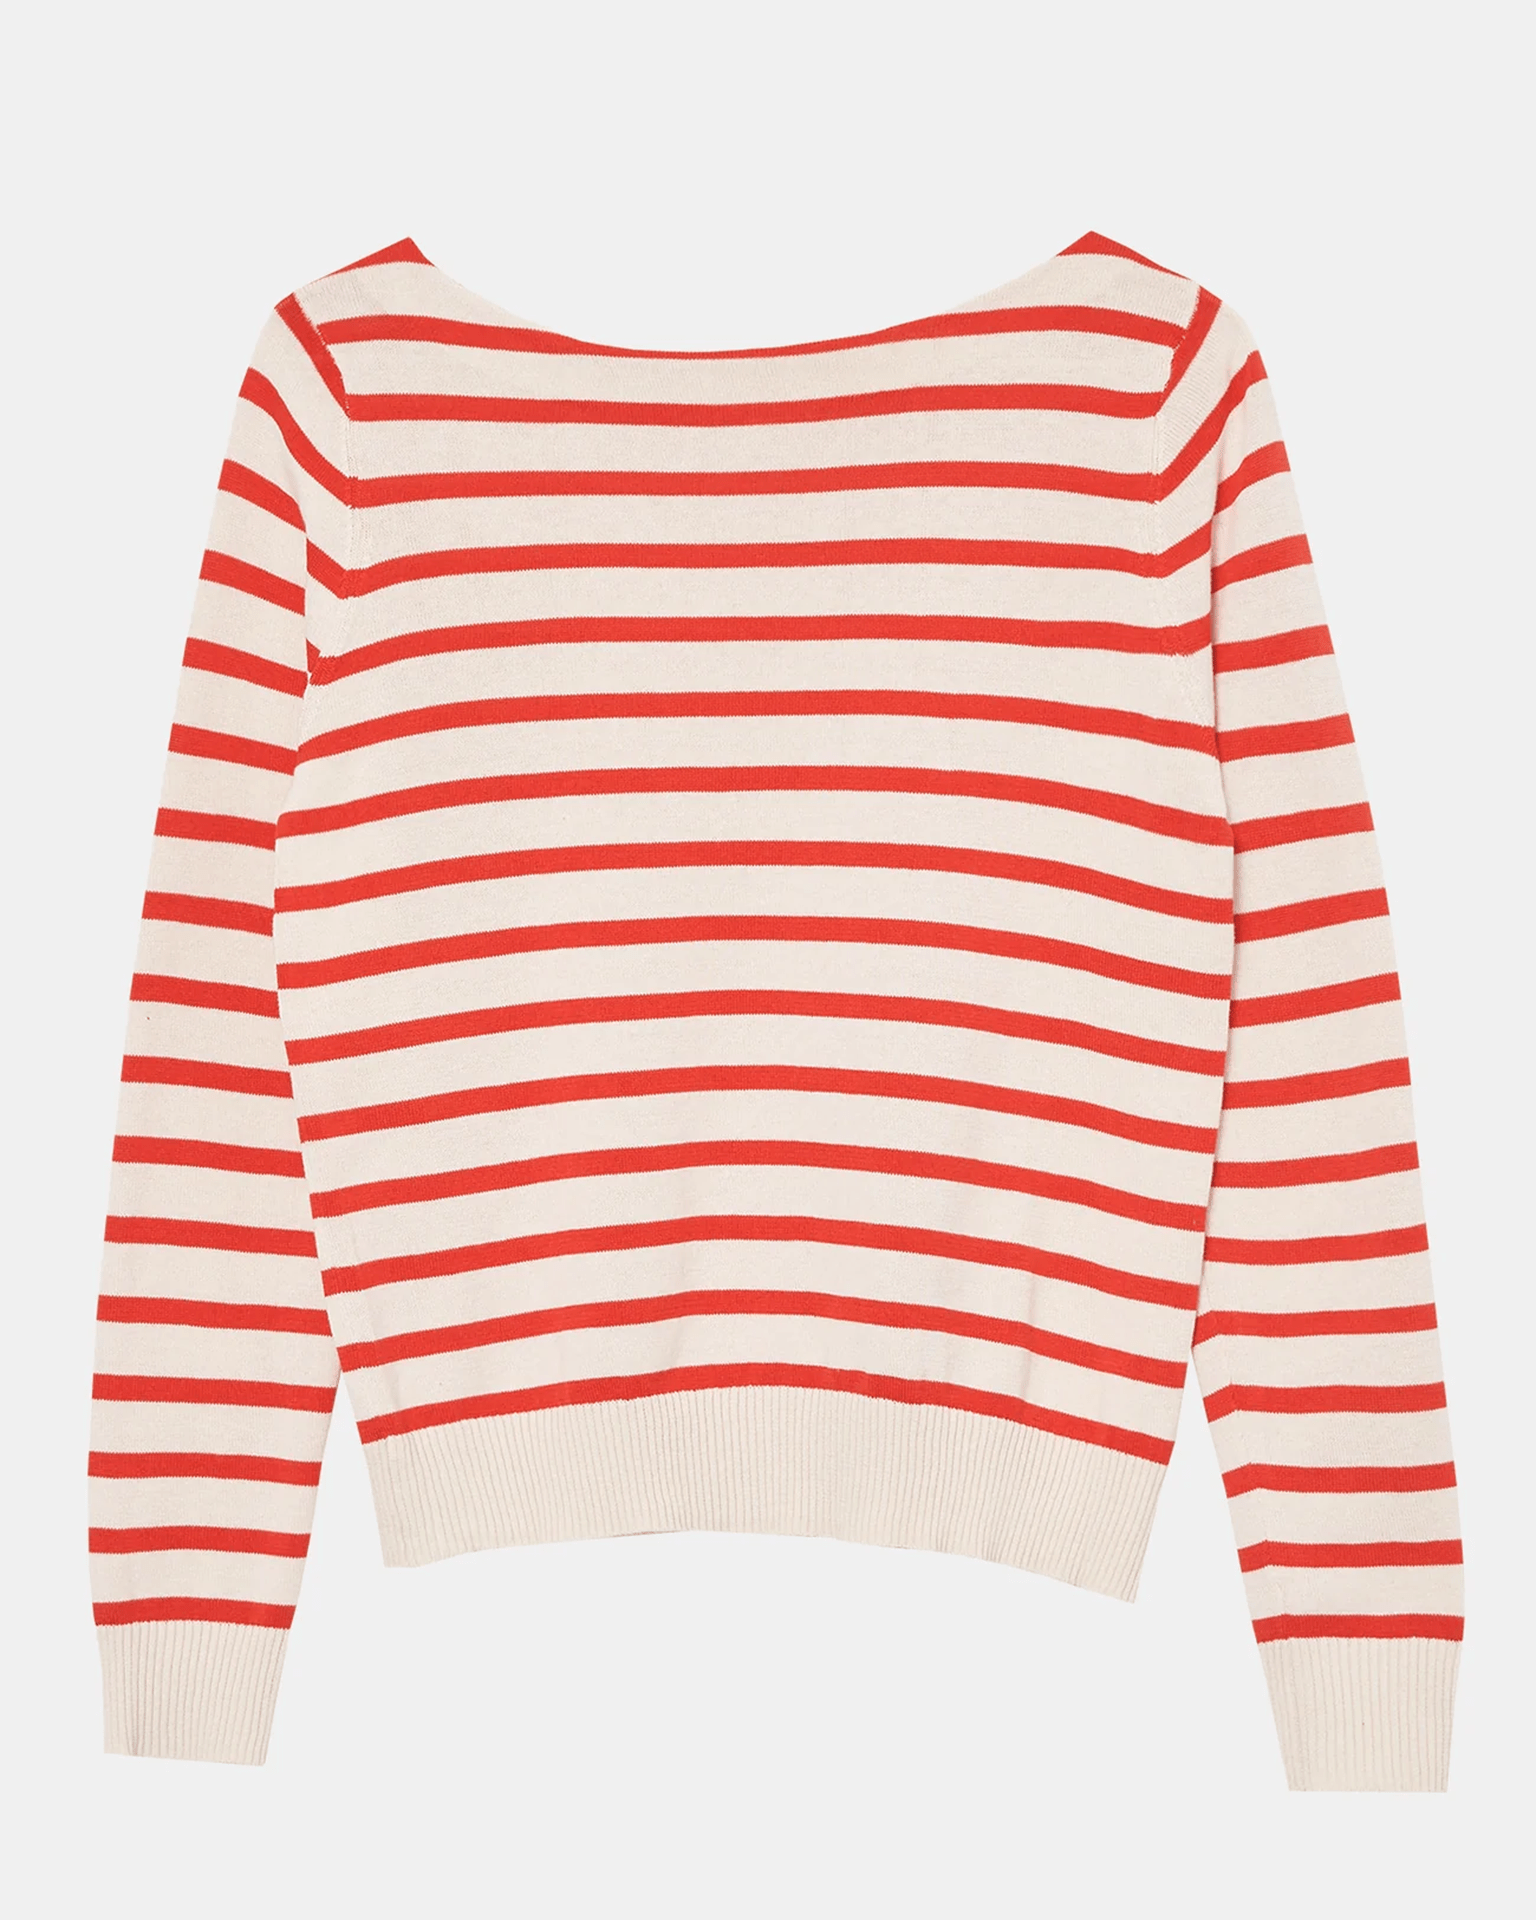 Memo contrast Verandering Demylee Beckie Stripe Top in Parchment/Red - Bliss Boutiques